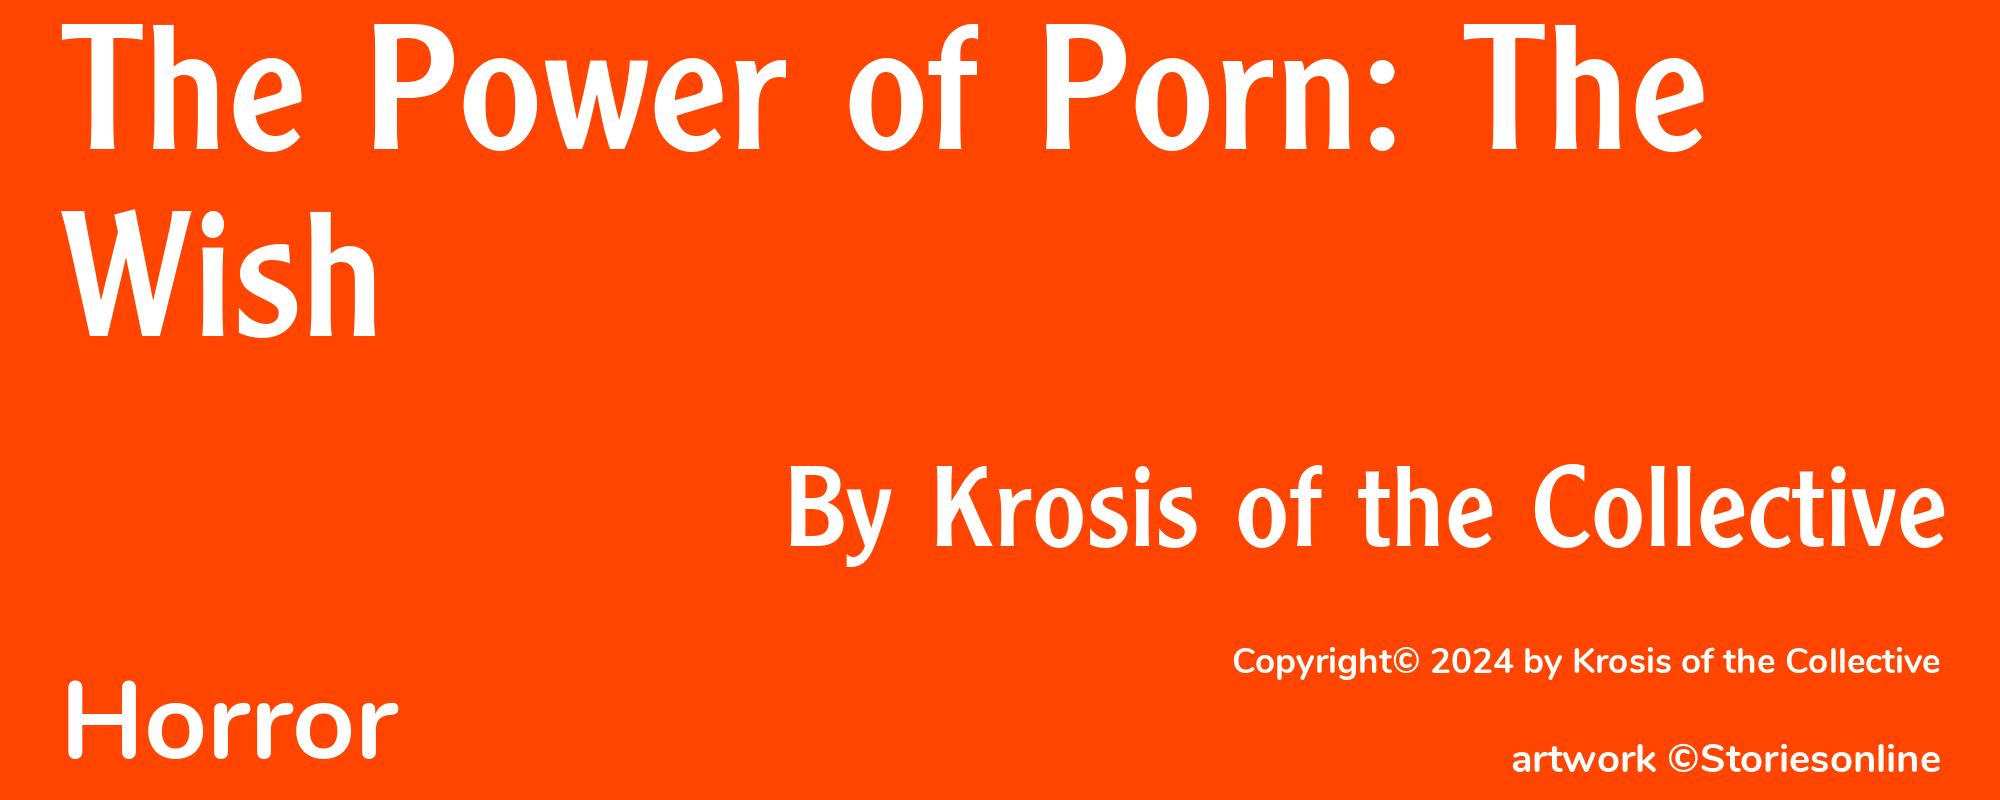 The Power of Porn: The Wish - Cover